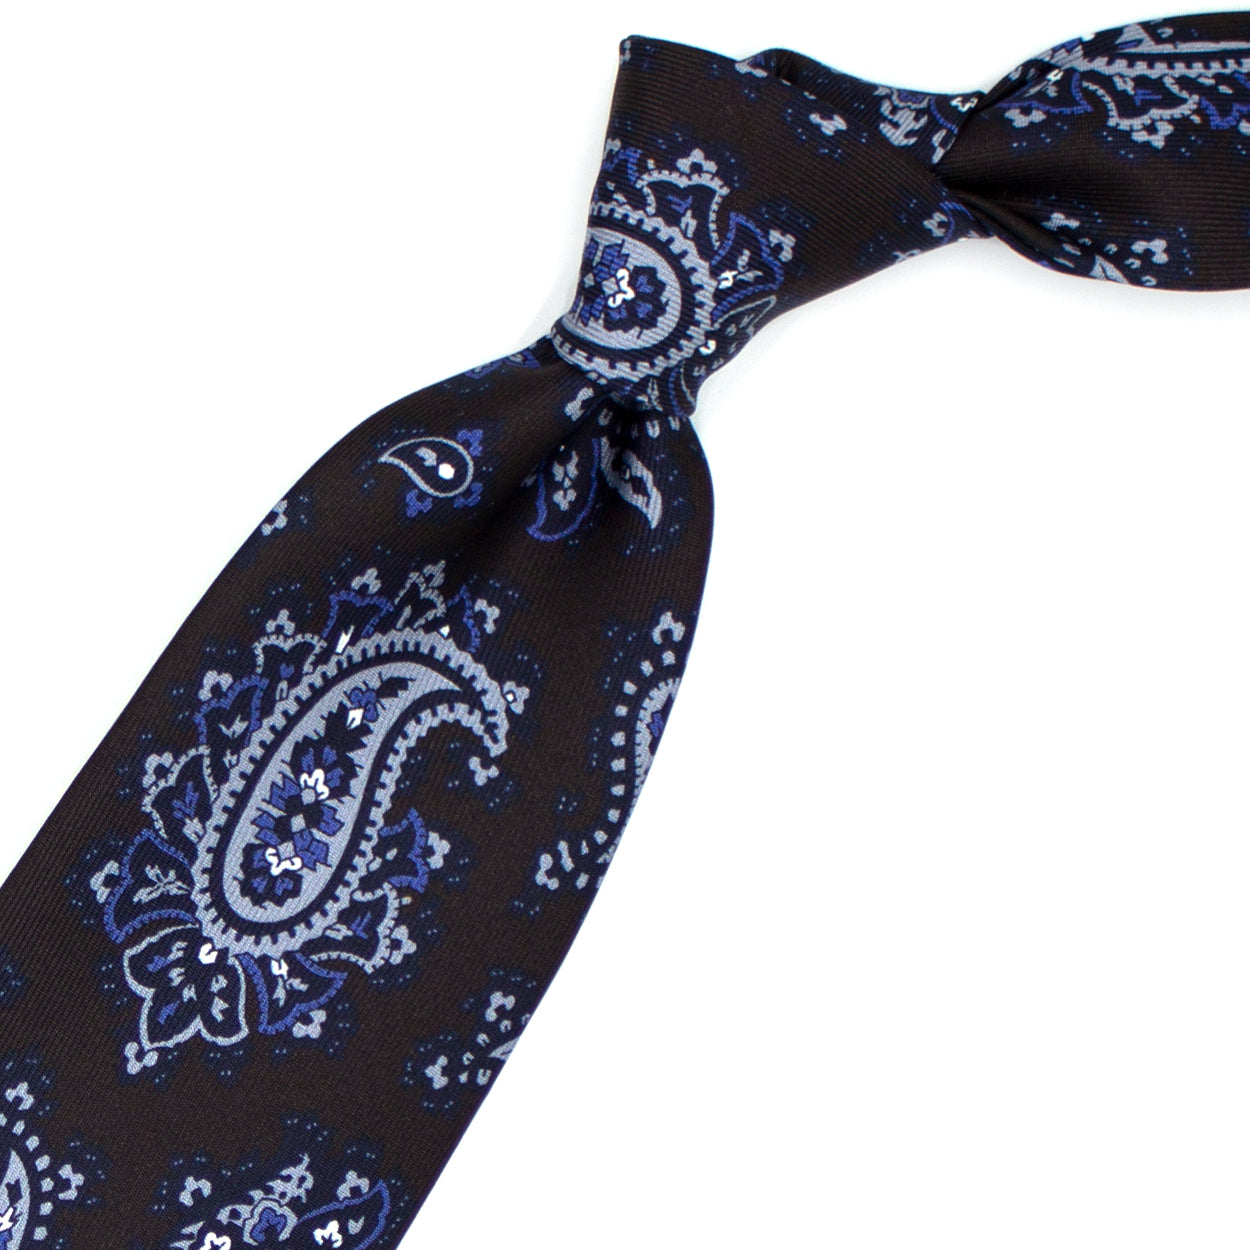 Brown tie with grey, blue and black paisleys